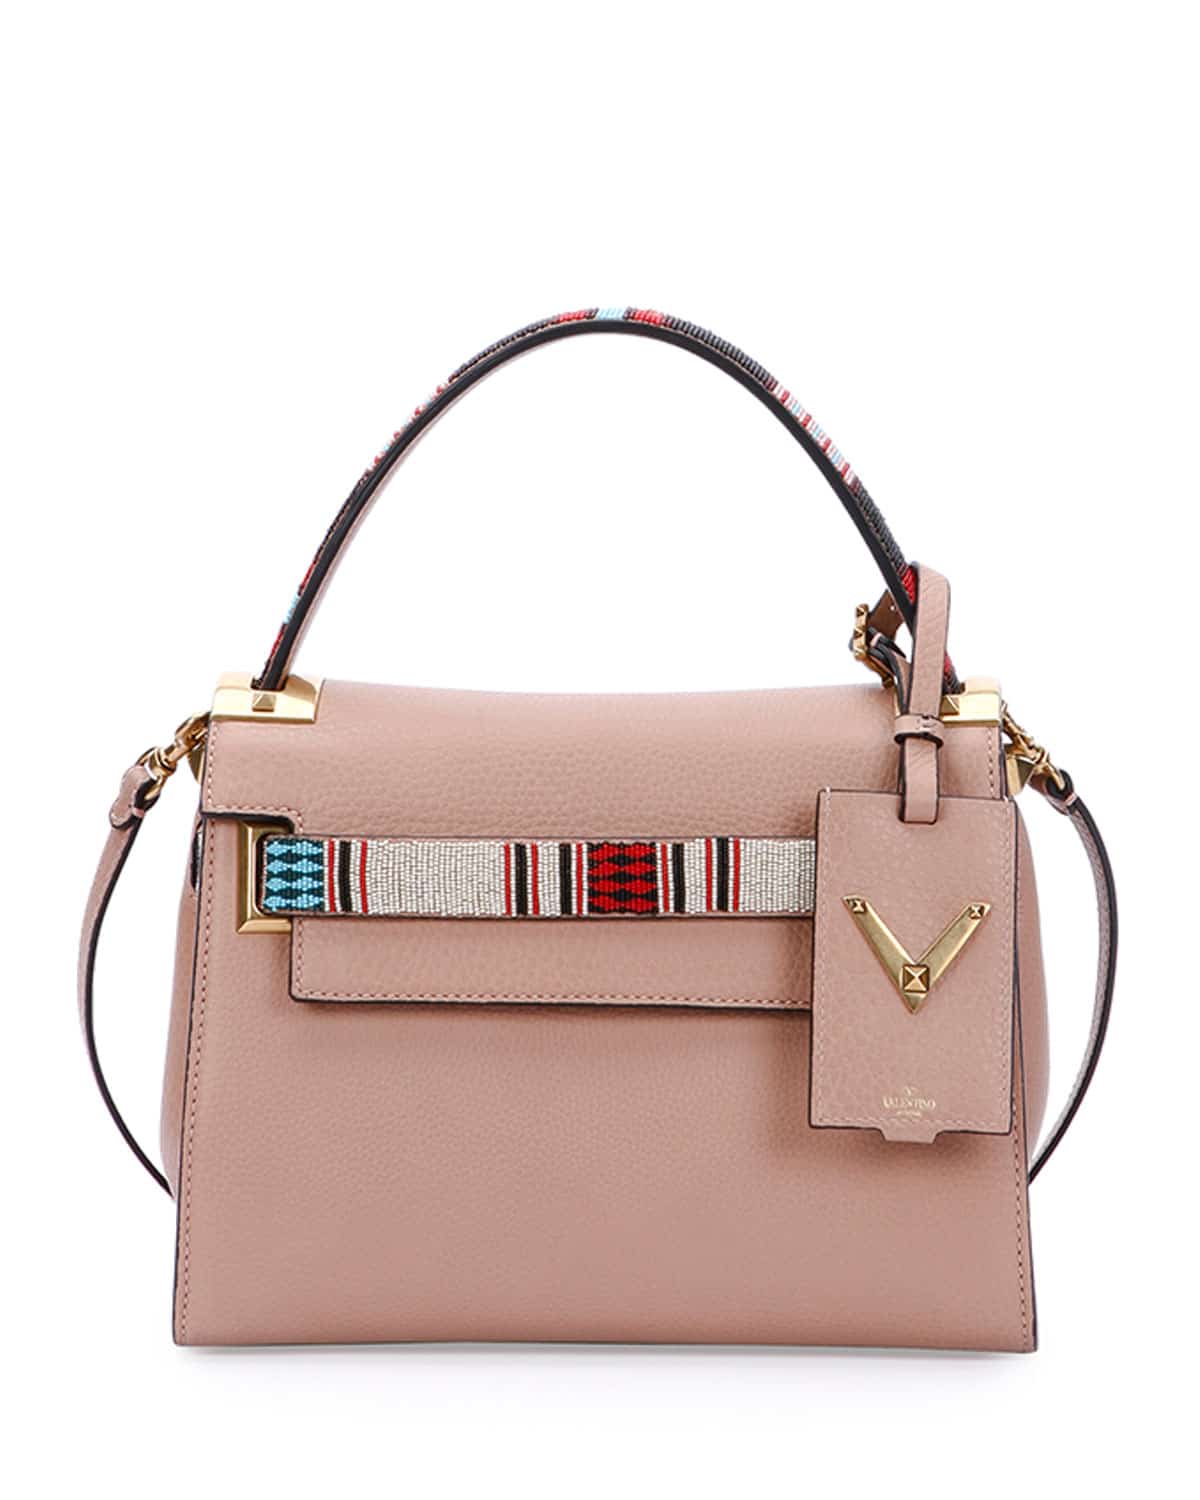 Valentino Latest Bag Collection Flash Sales, 60% OFF 